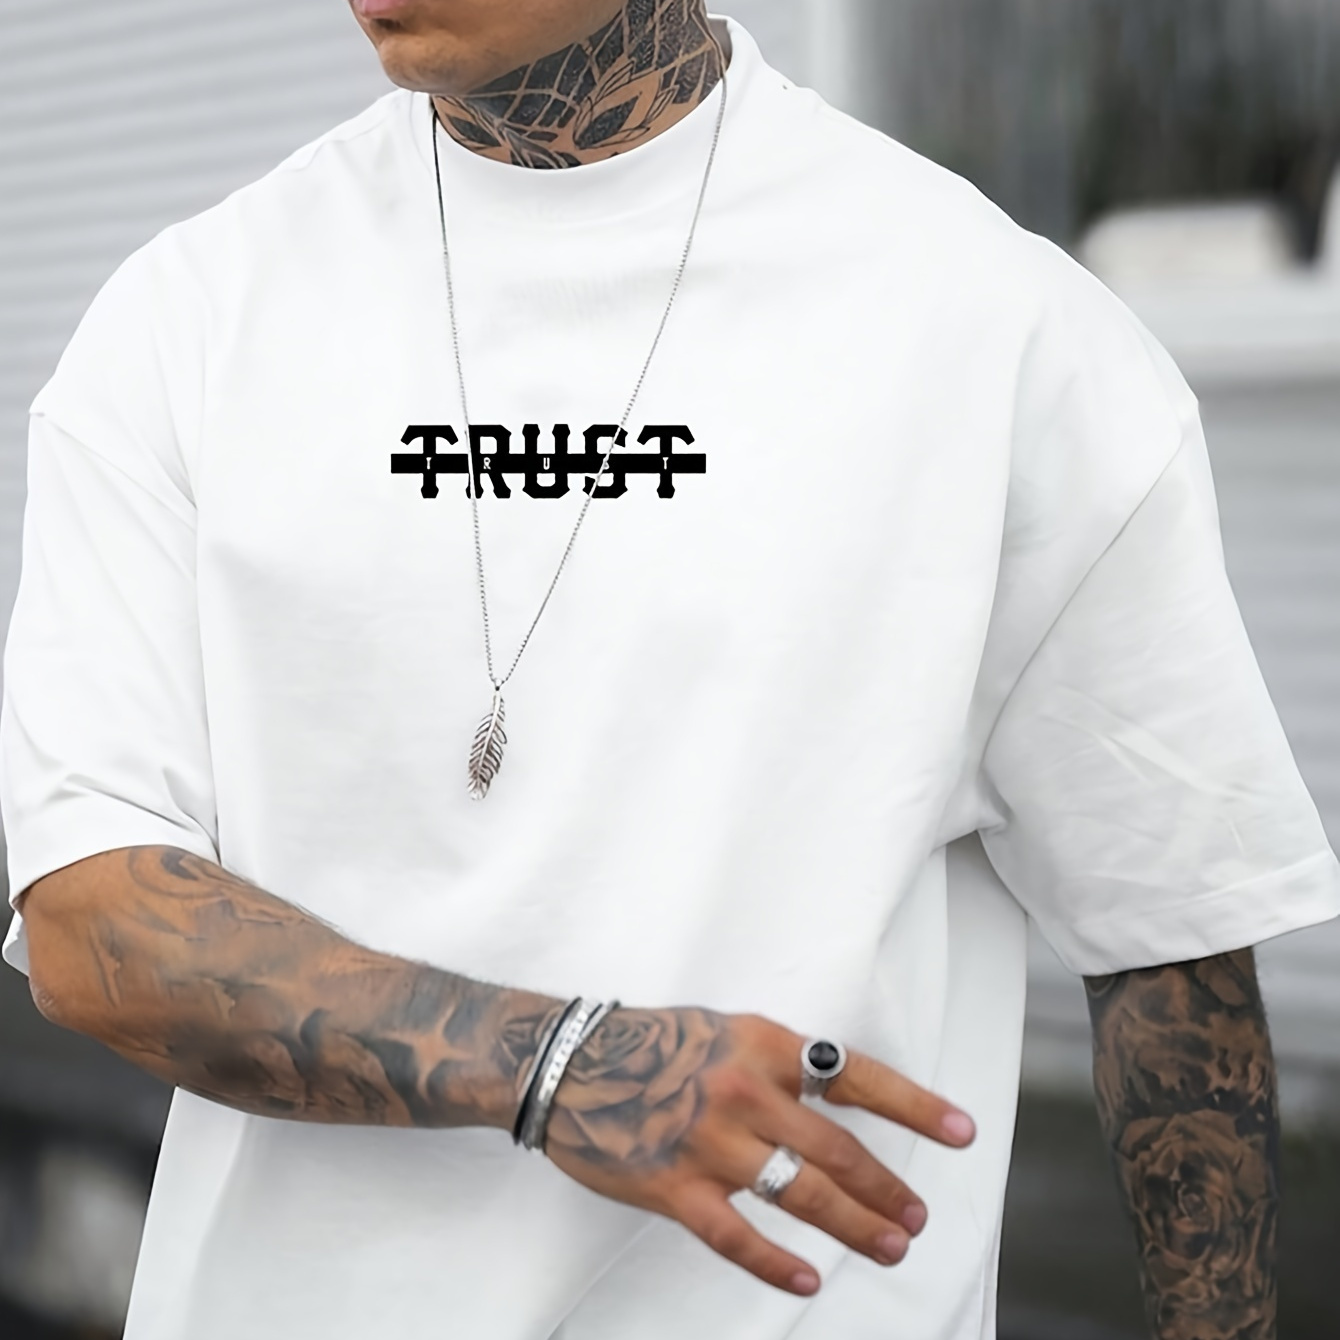 

Trust Crossed Out Print T Shirt, Tees For Men, Casual Short Sleeve T-shirt For Summer